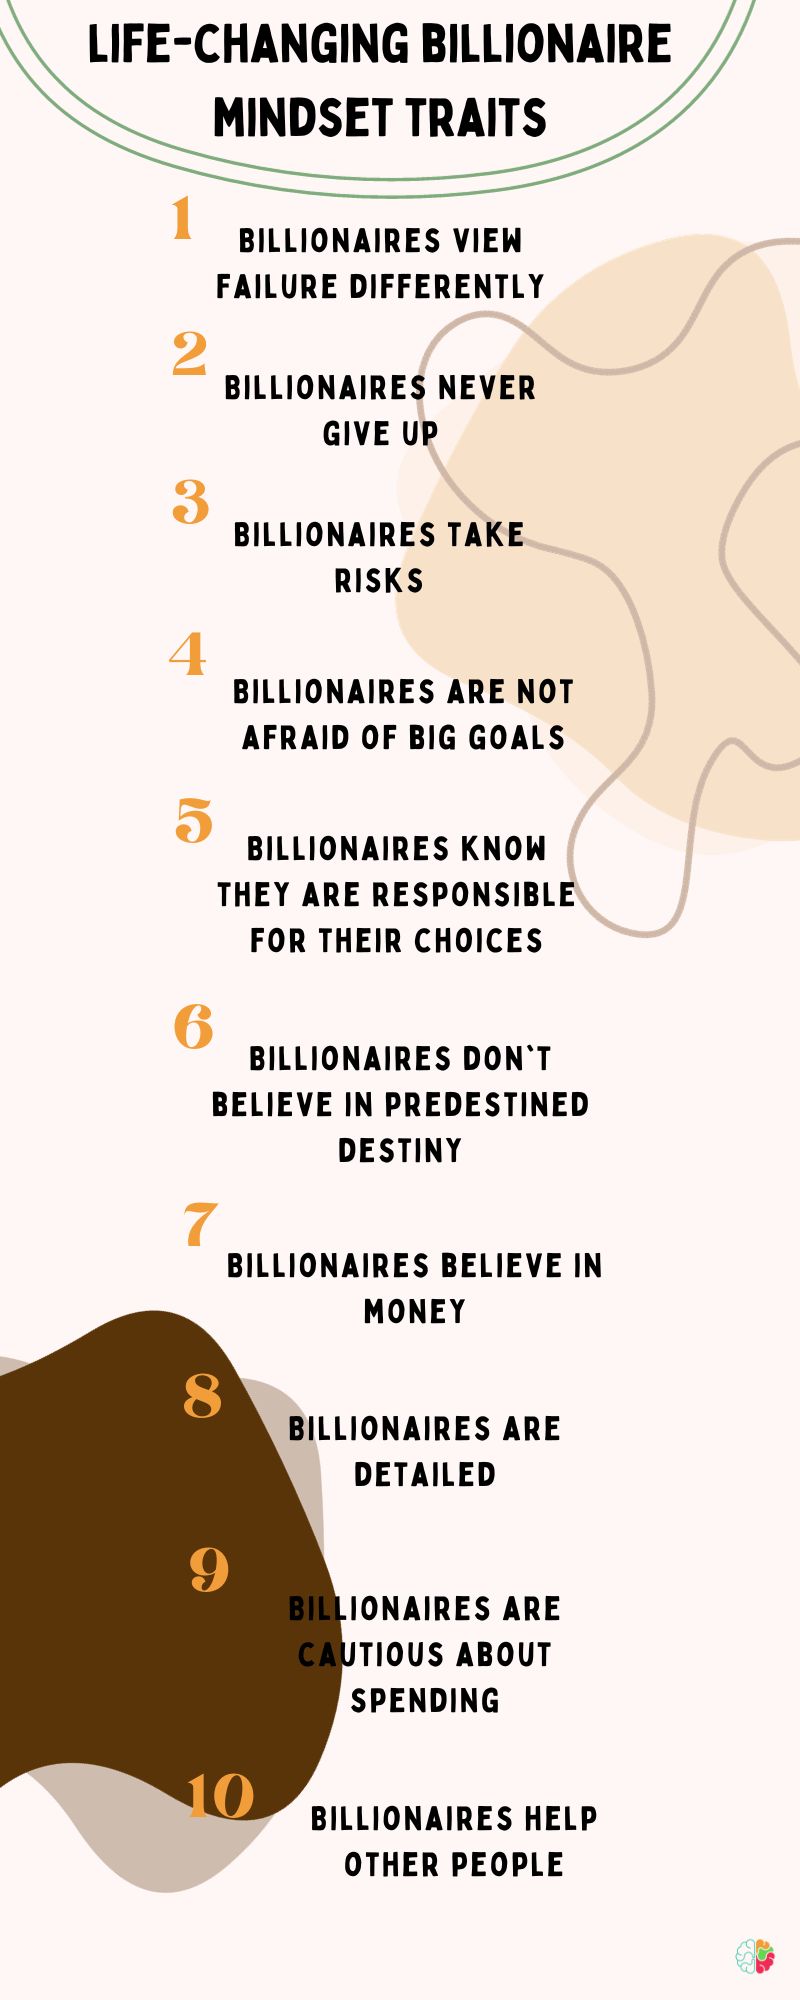 15 Powerful Billionaire Mindset Traits To Change Your Life in 2023